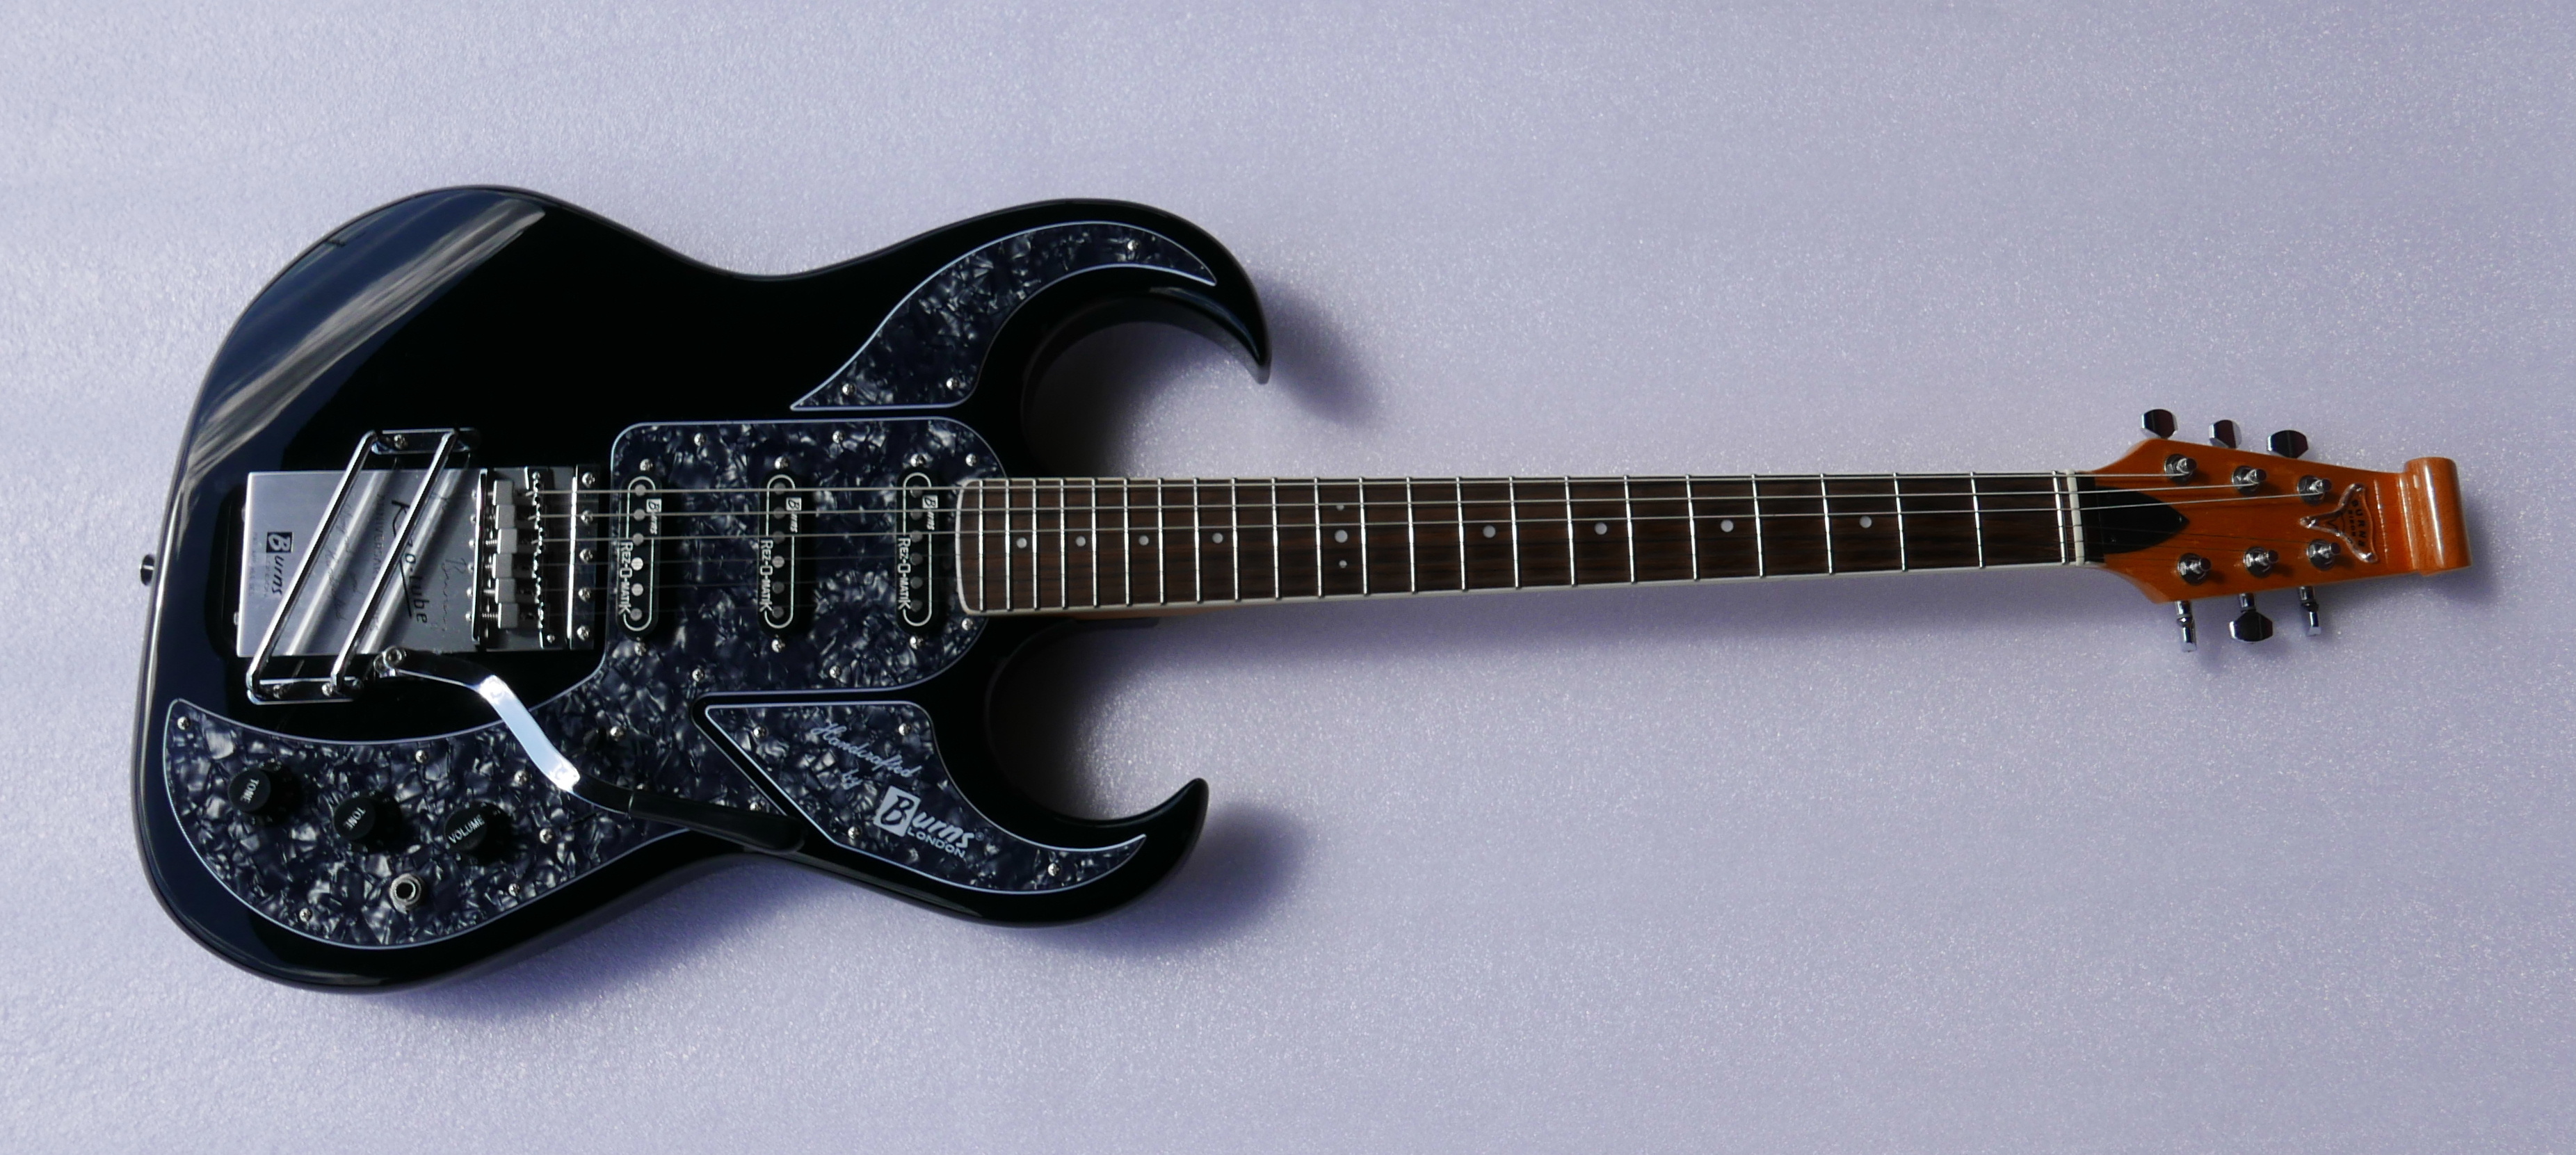 A Burns Bison electric guitar, anniversary model in original snakeskin case and a 50 Years of